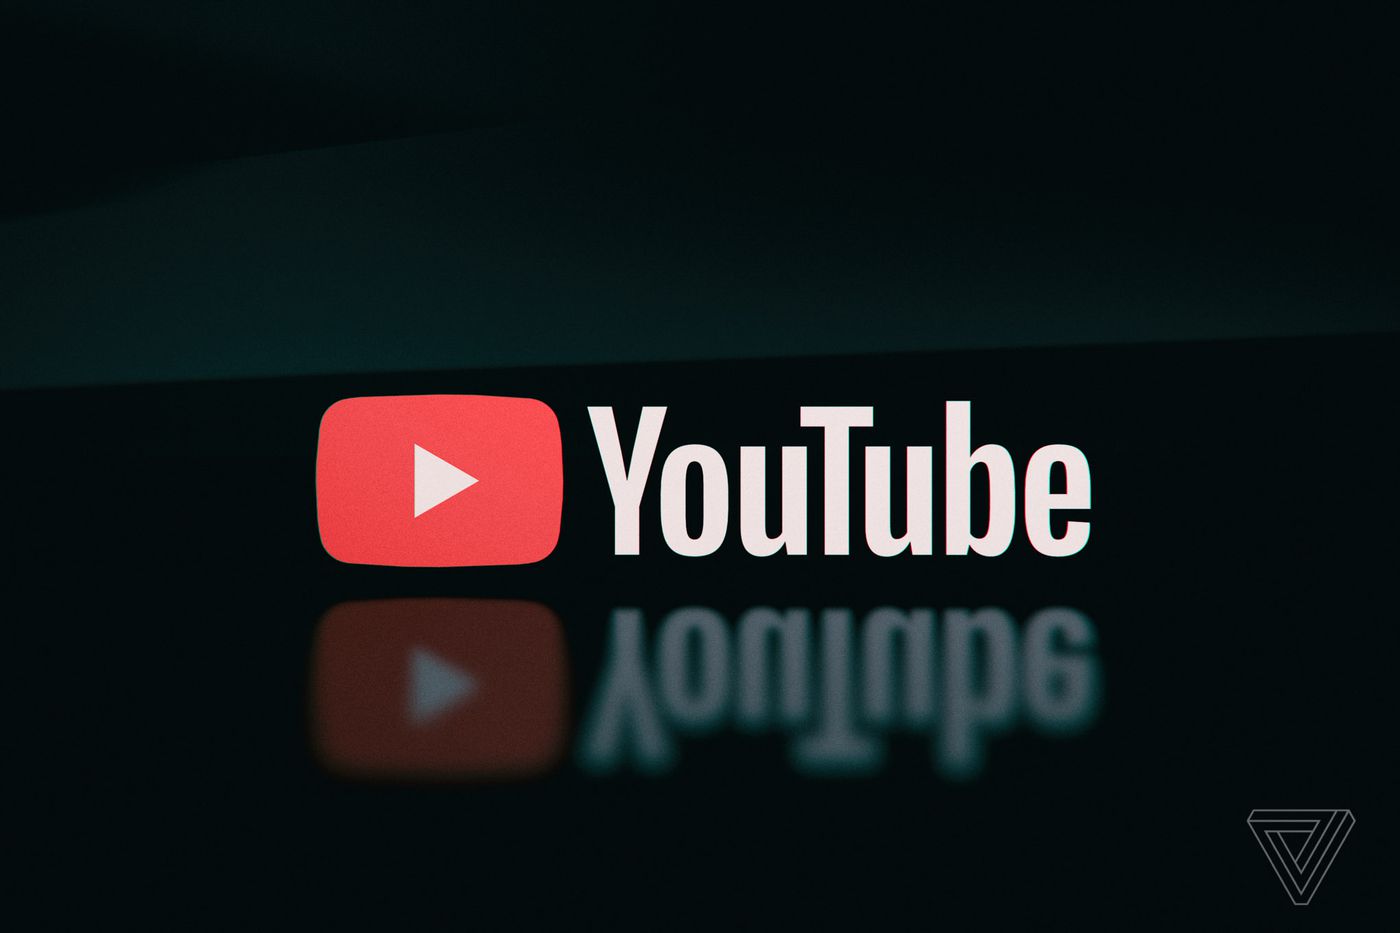 YouTube's Automatic Tools Detect Over 99% of Copyright Infringements